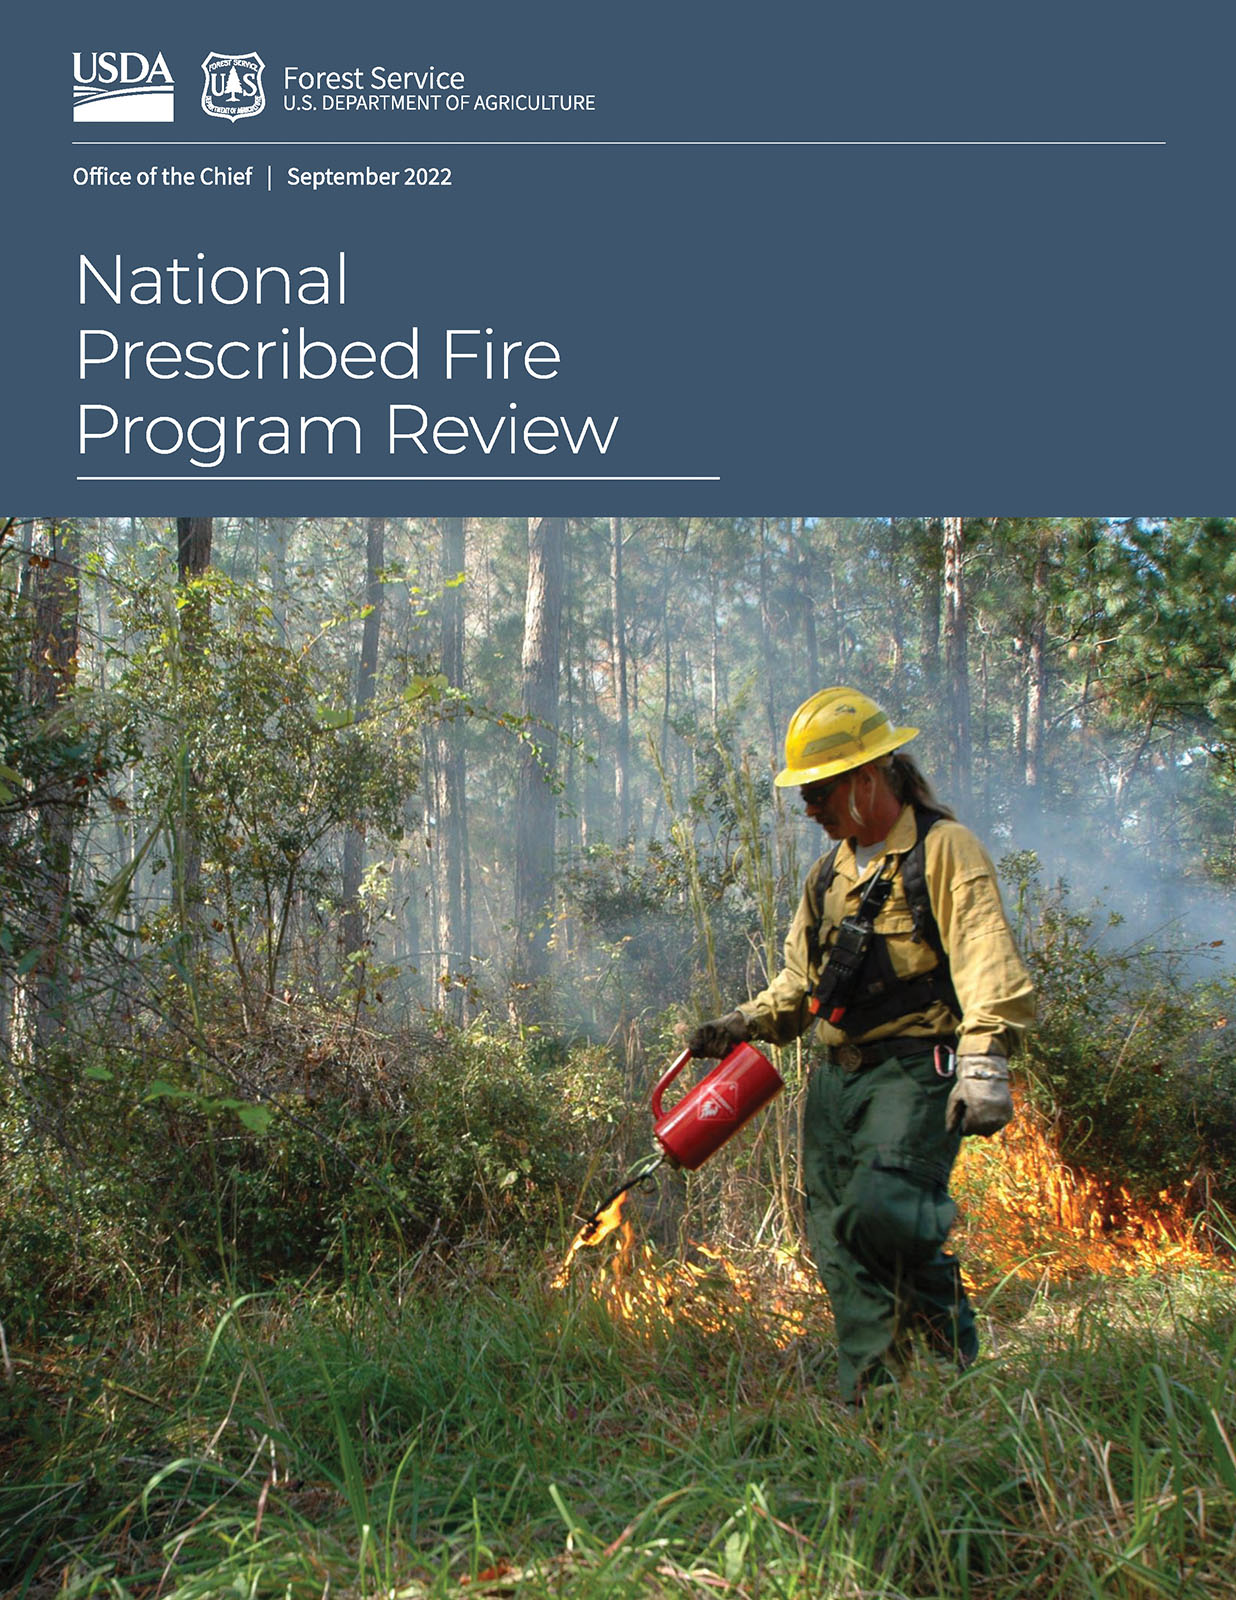 Forest Service Completes Prescribed Fire Review